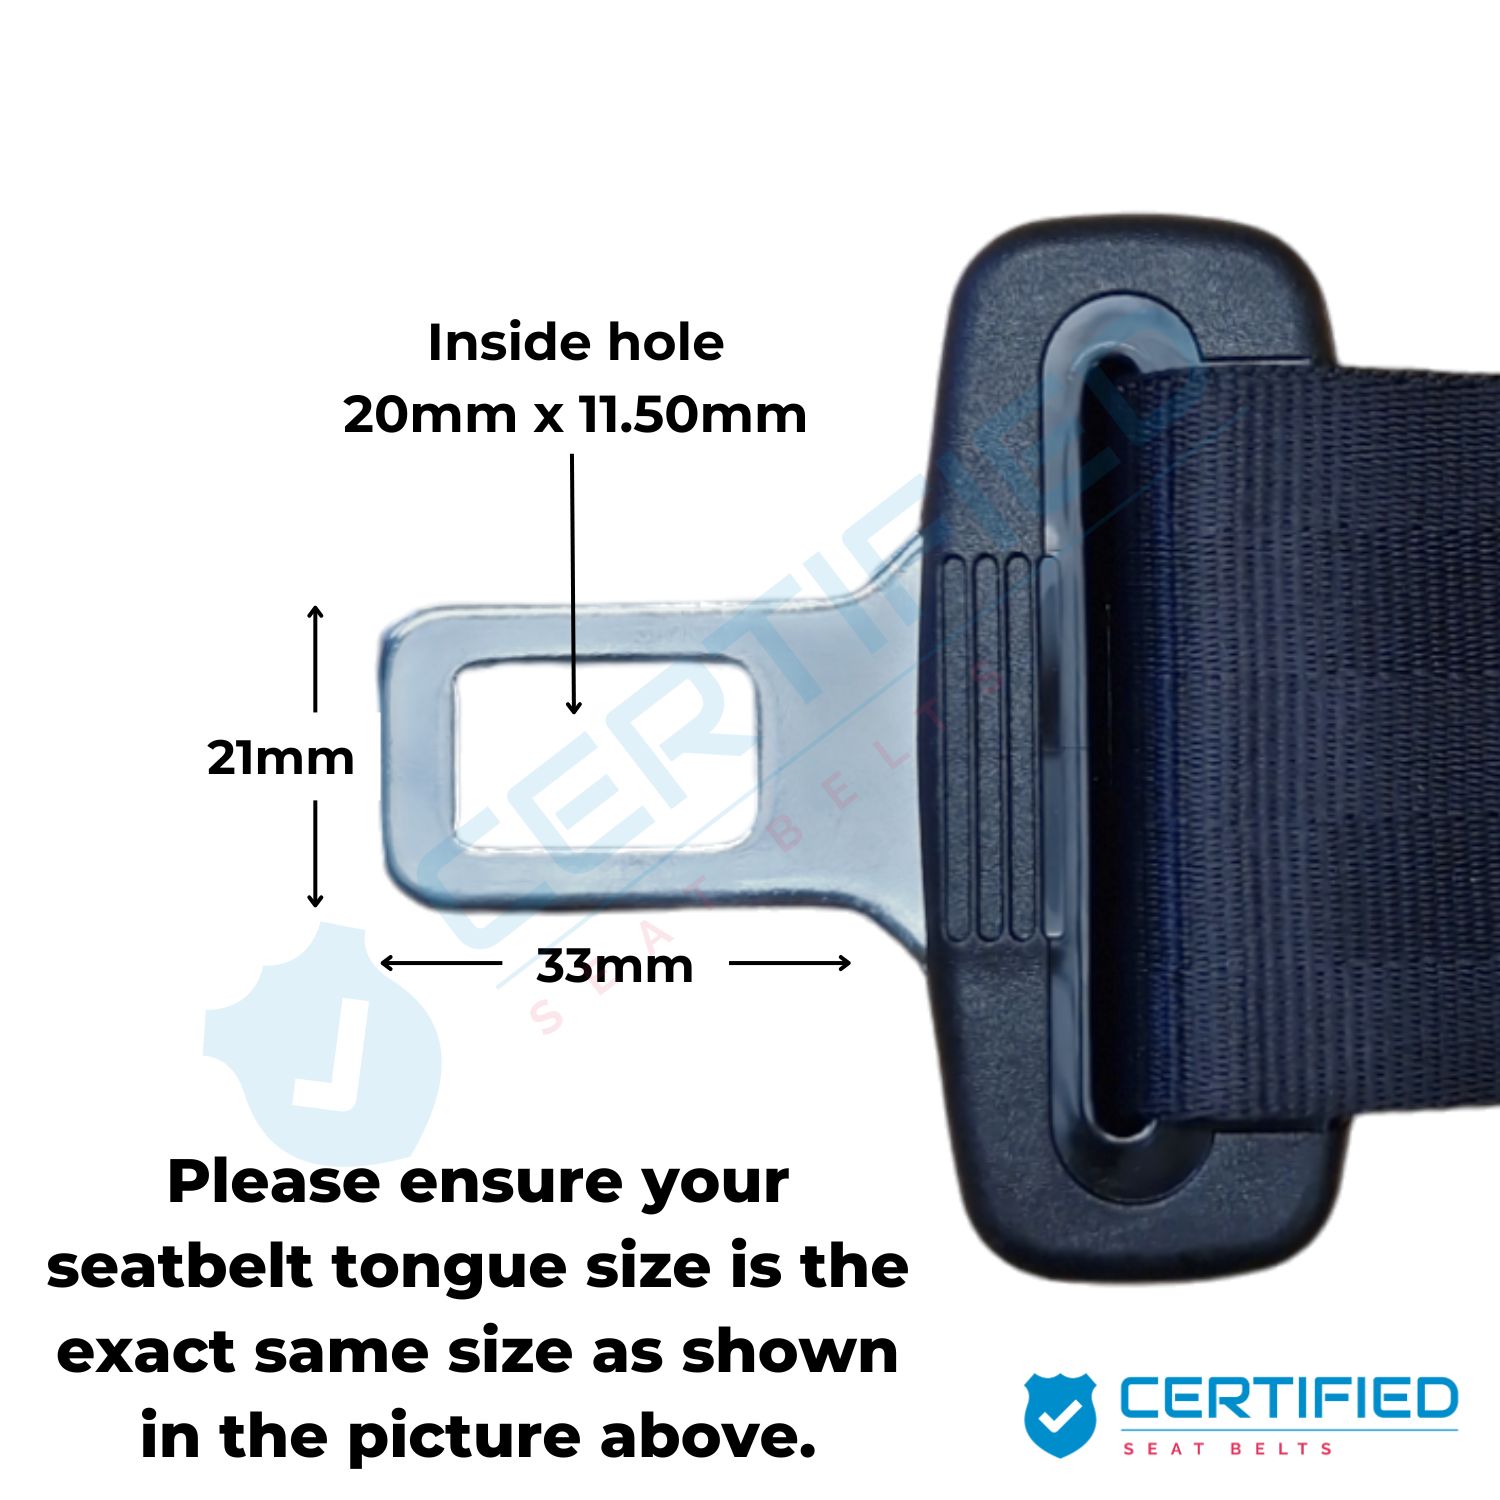 More safety and comfort - a belt extension!